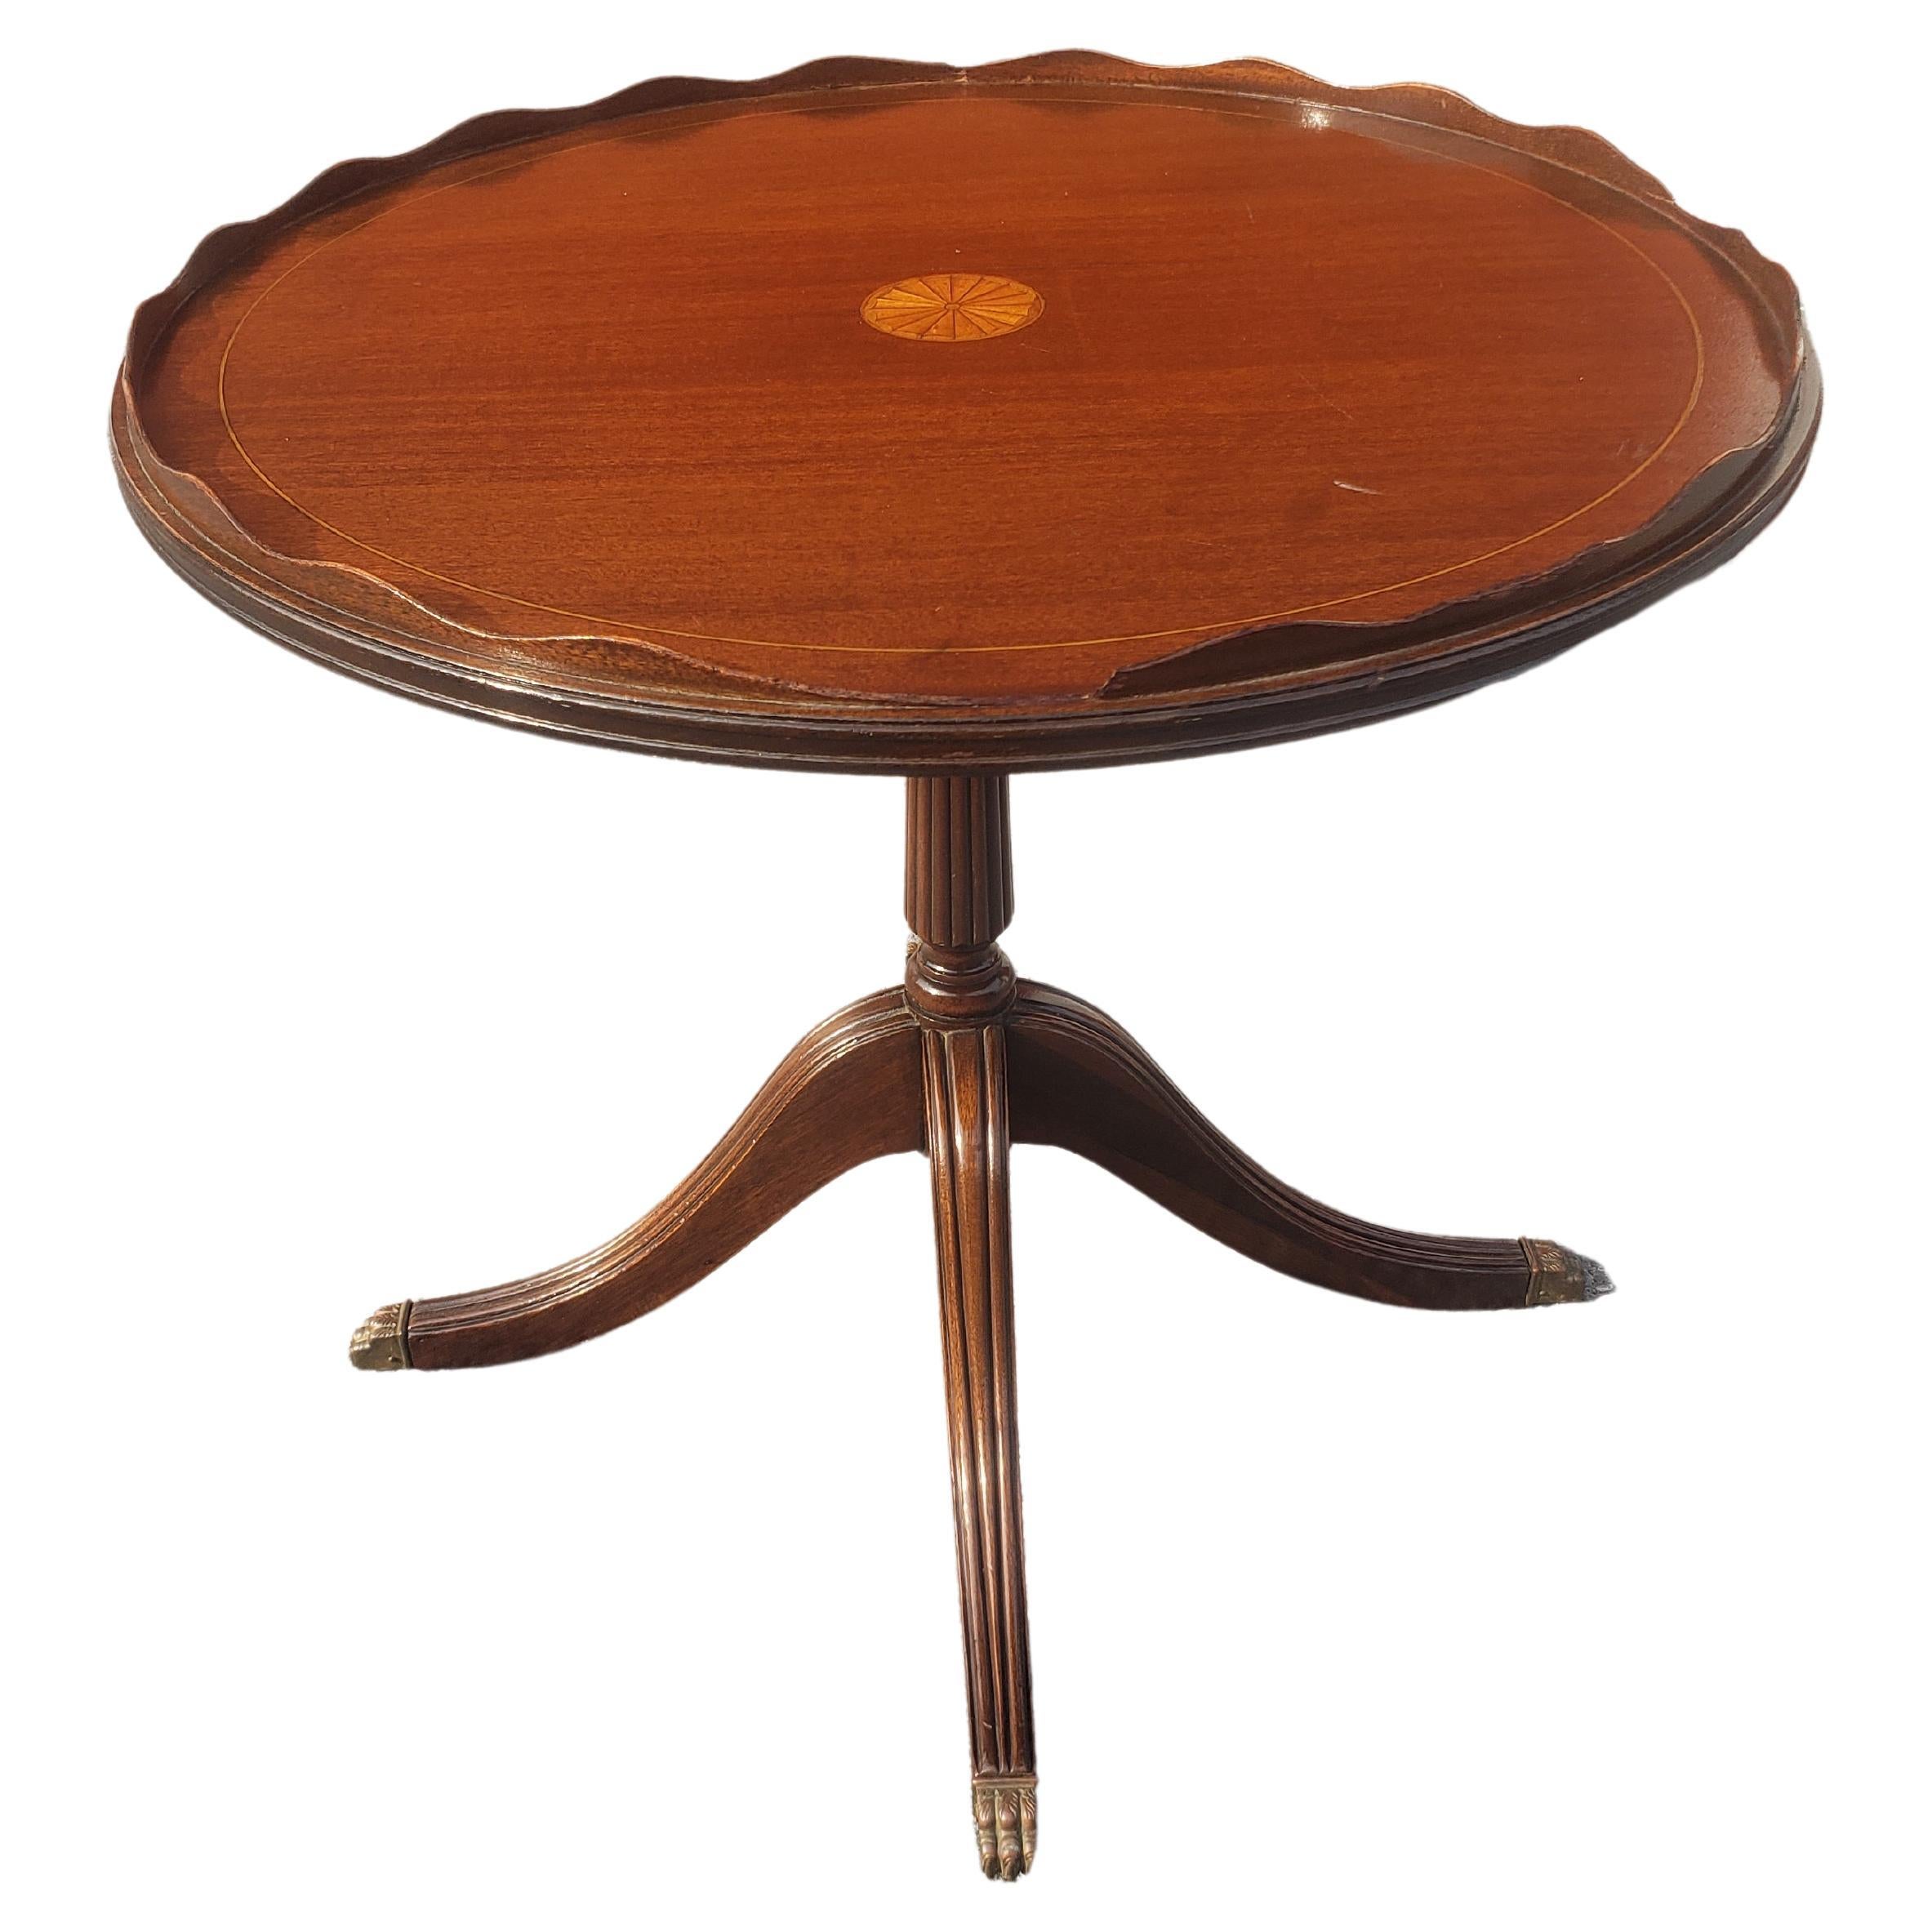 Early 20th Century Ferguson Brothers Mahogany Inlaid quadpod Pedestal Galleried Side Table with Brass paw feet.
Measures 22.5